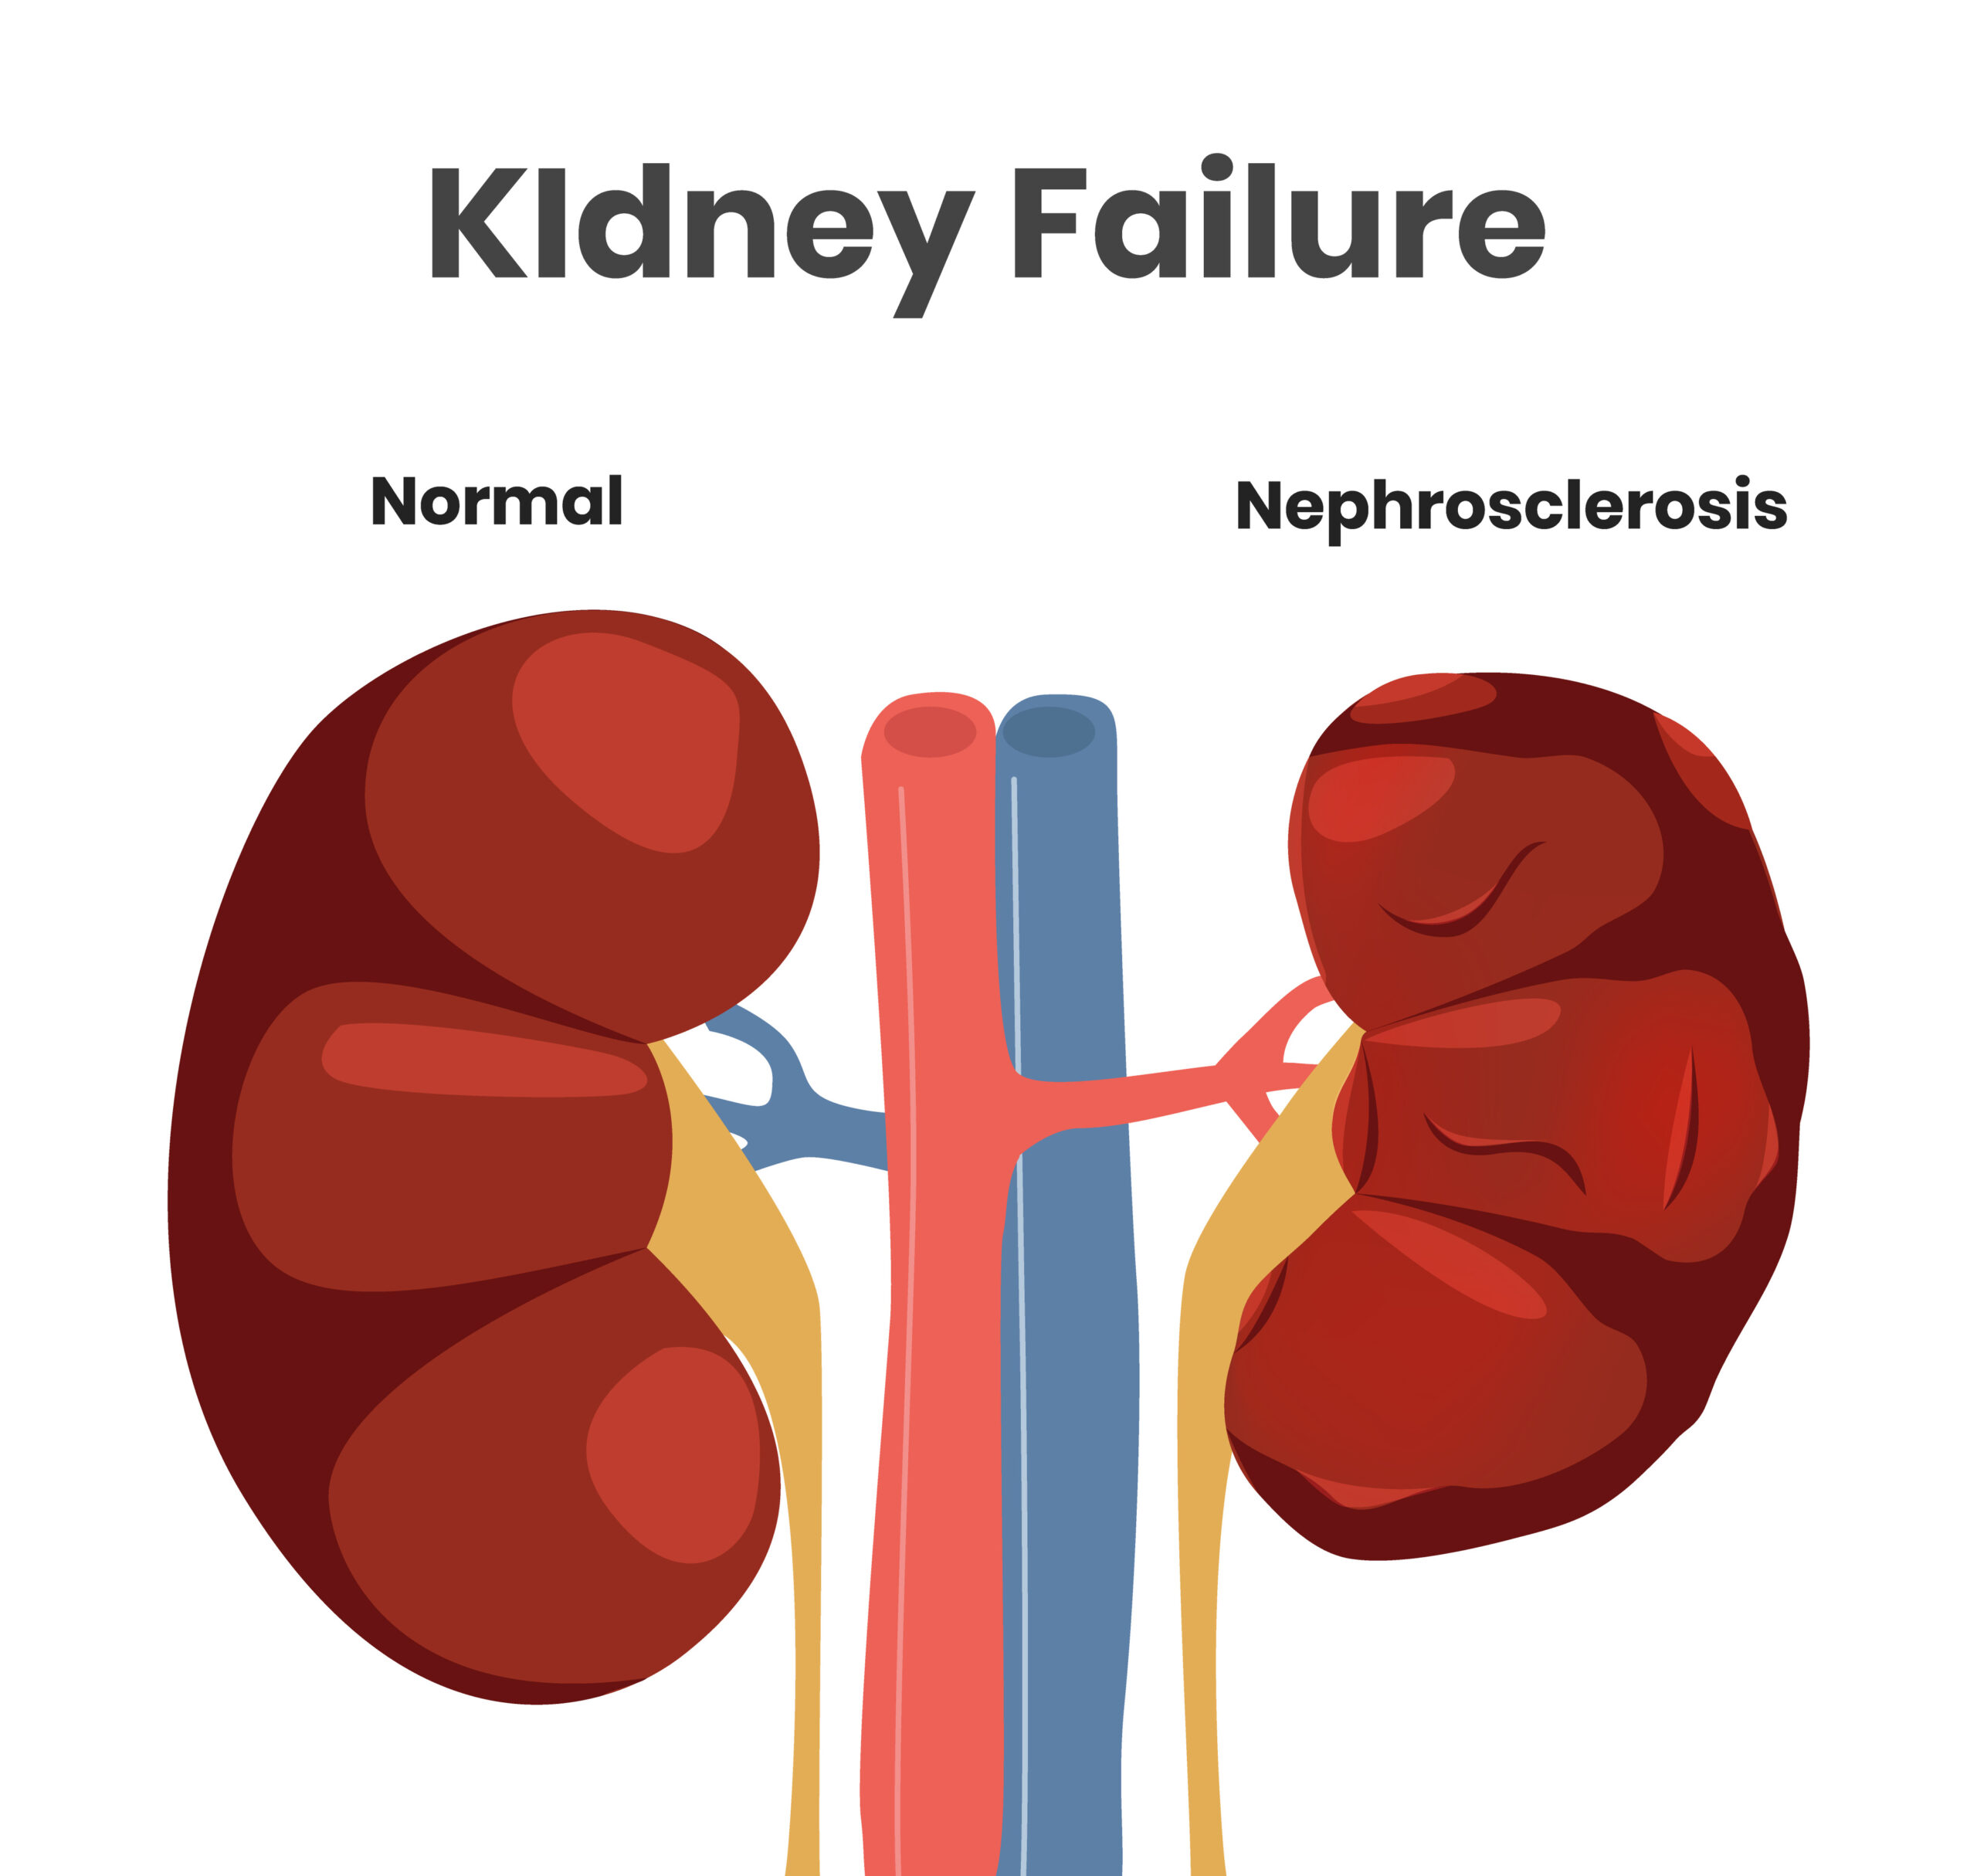 Diagram showing a normal kidney versus a kidney with nephroschlerosis. 